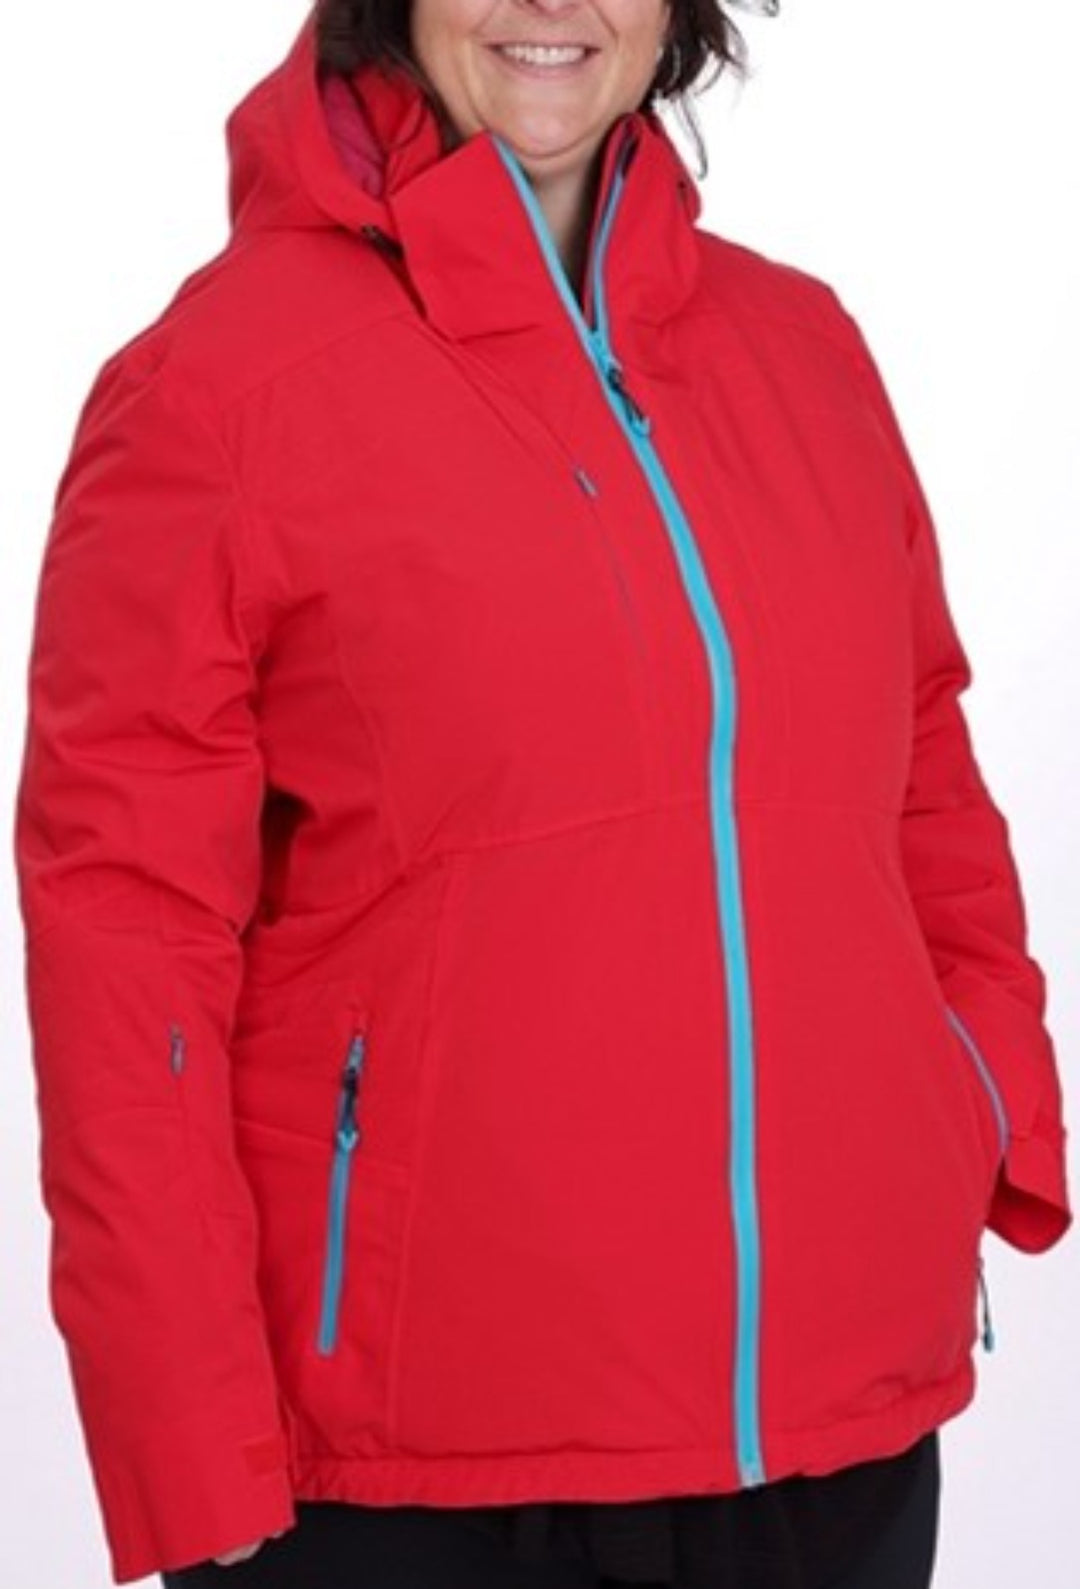 Plus Size Insbruck Insulated Ski Jacket by Sportive Plus